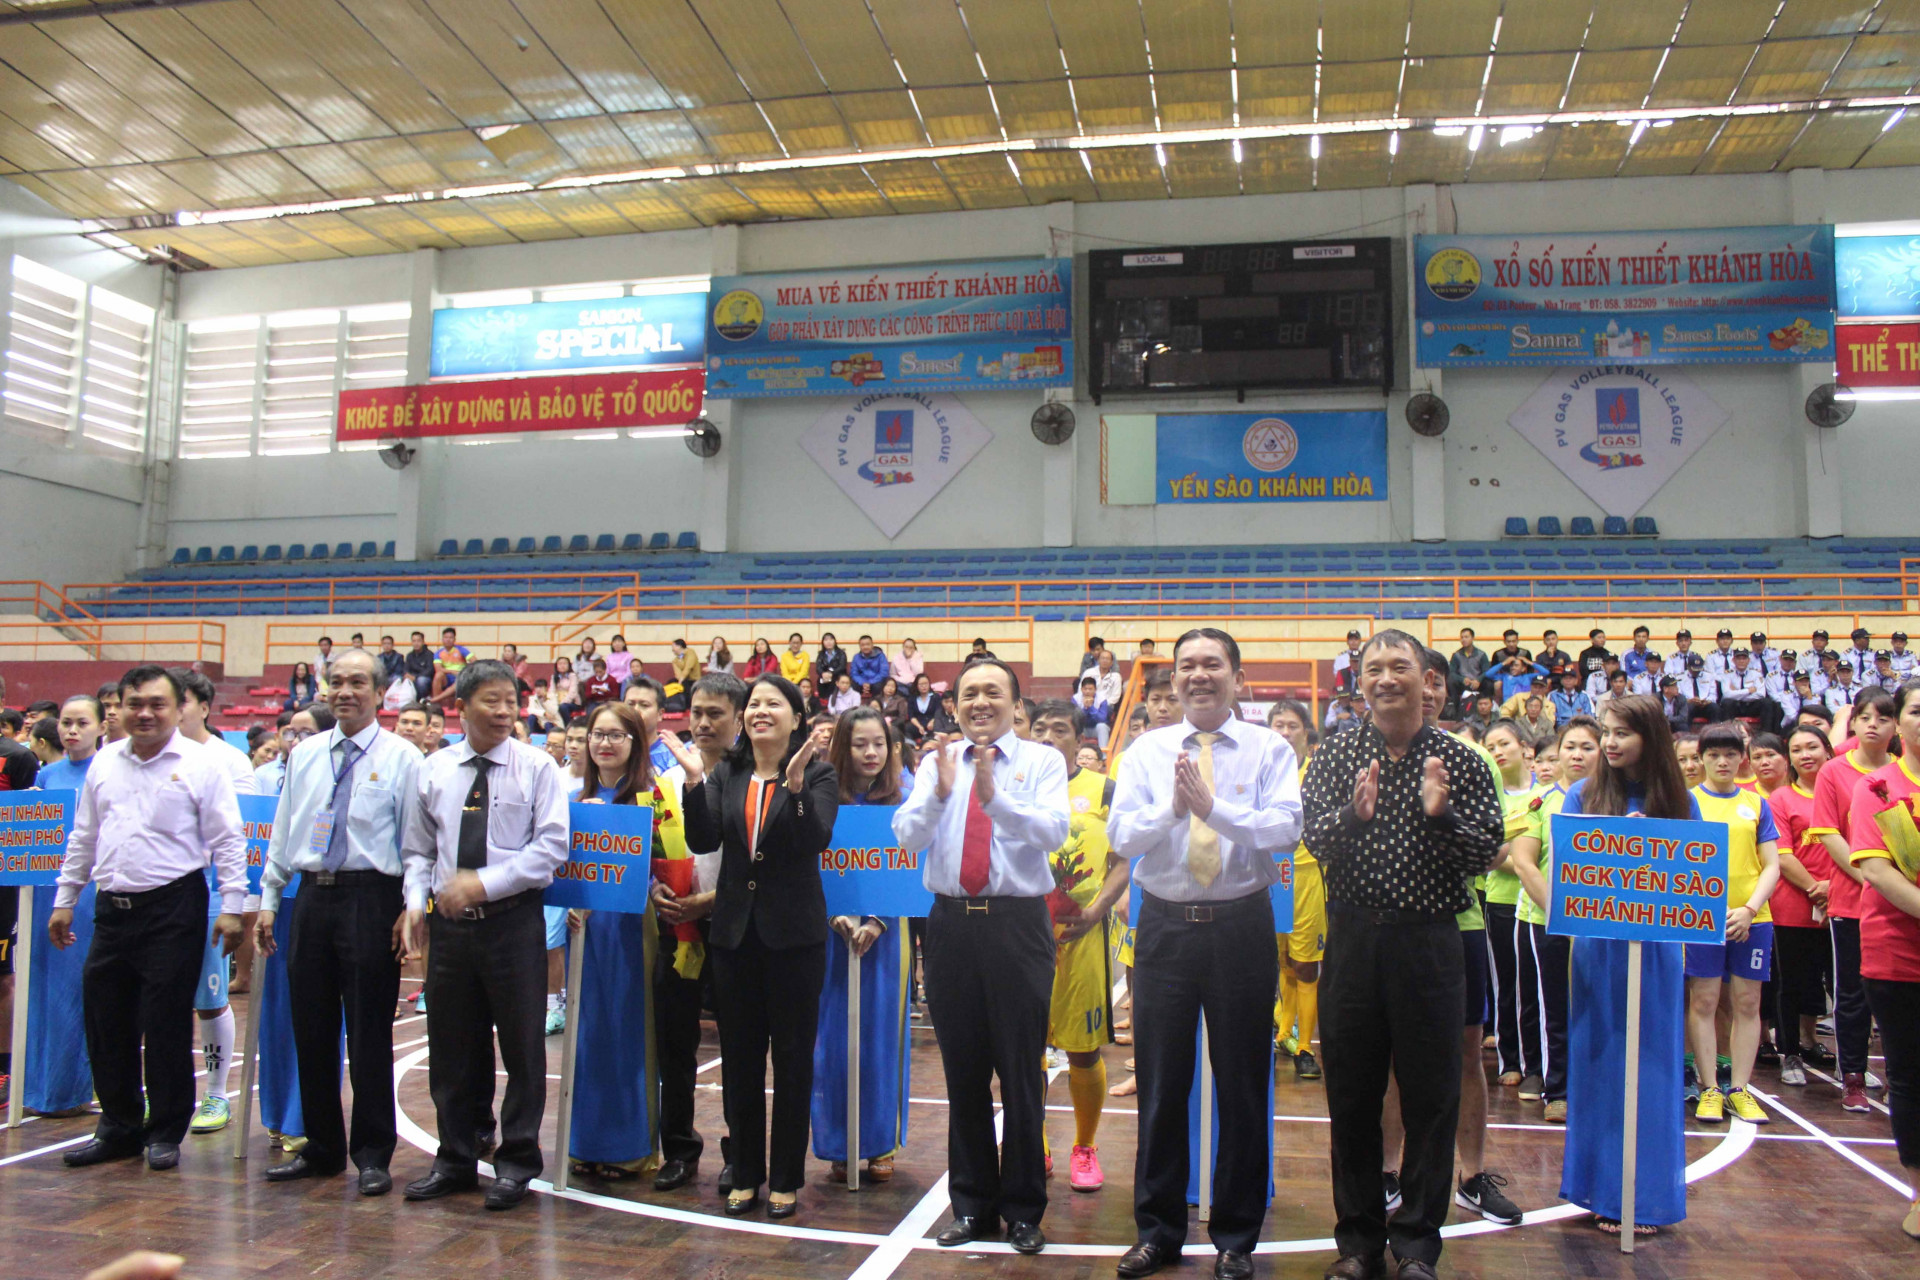 Leaders of Khanh Hoa Salanganes Nest Company posing for souvenir photo with teams.